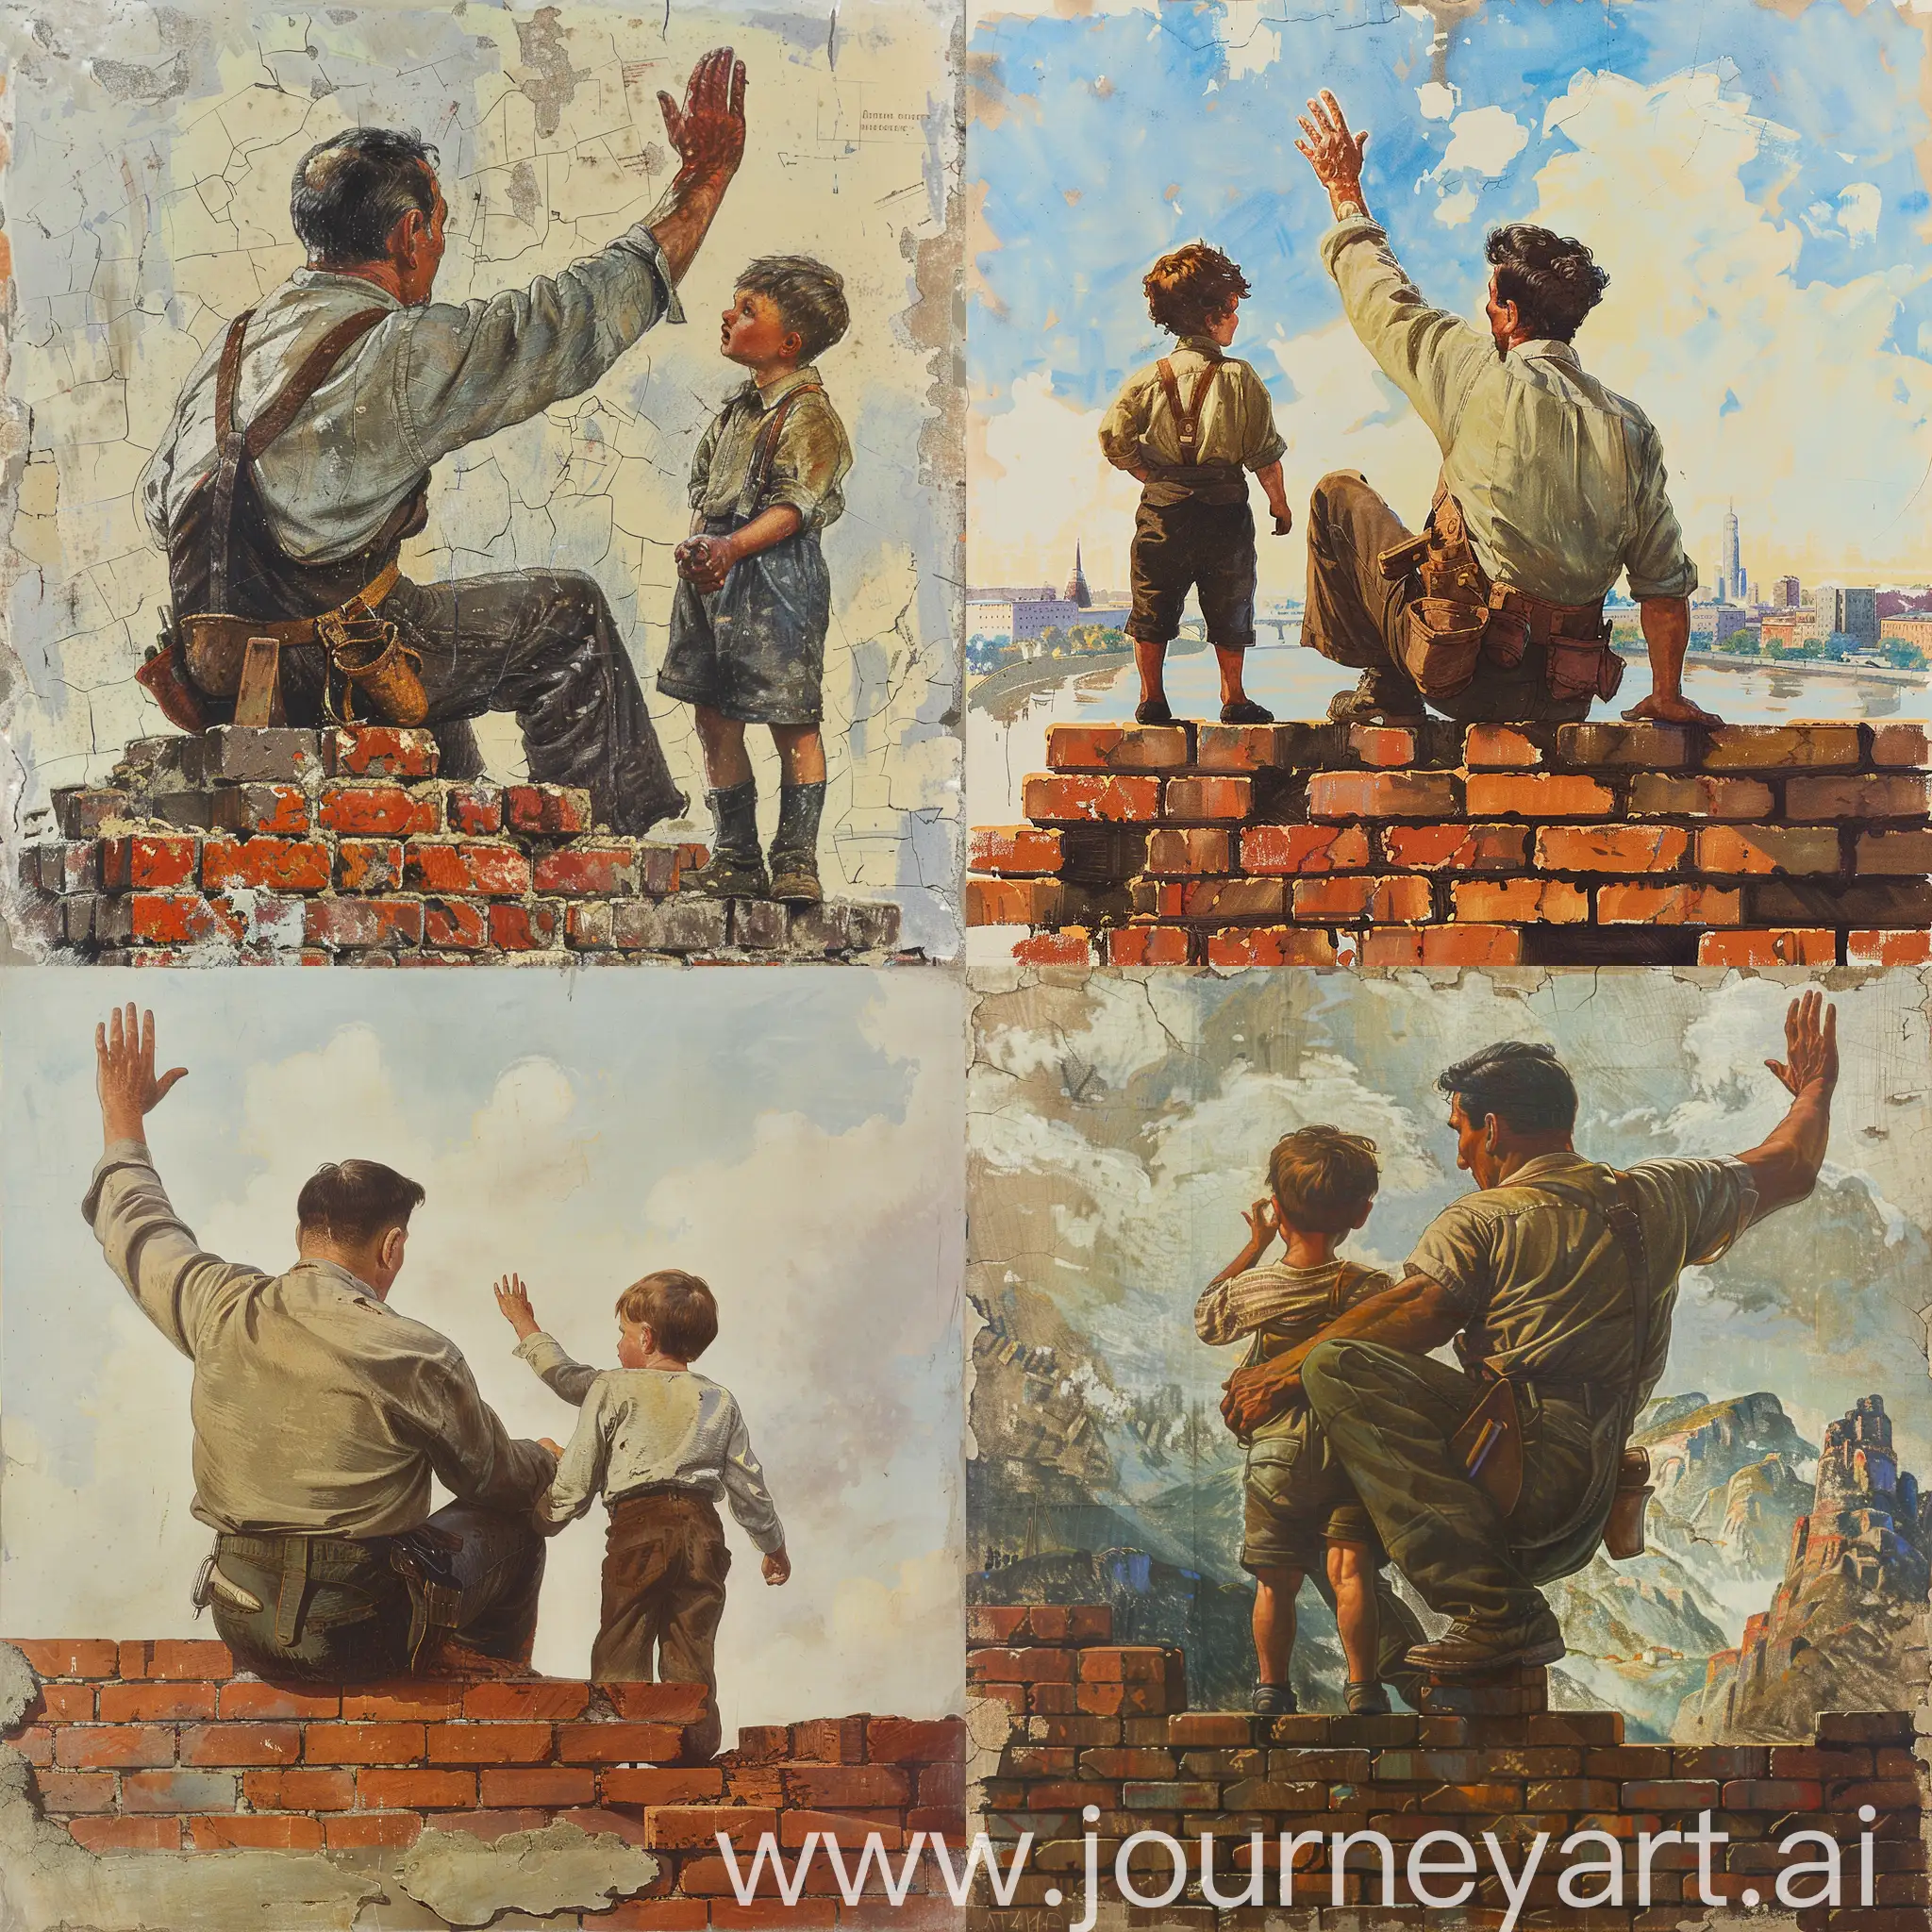 Father-and-Son-Building-Together-Soviet-Poster-Style-Brickwork-Scene